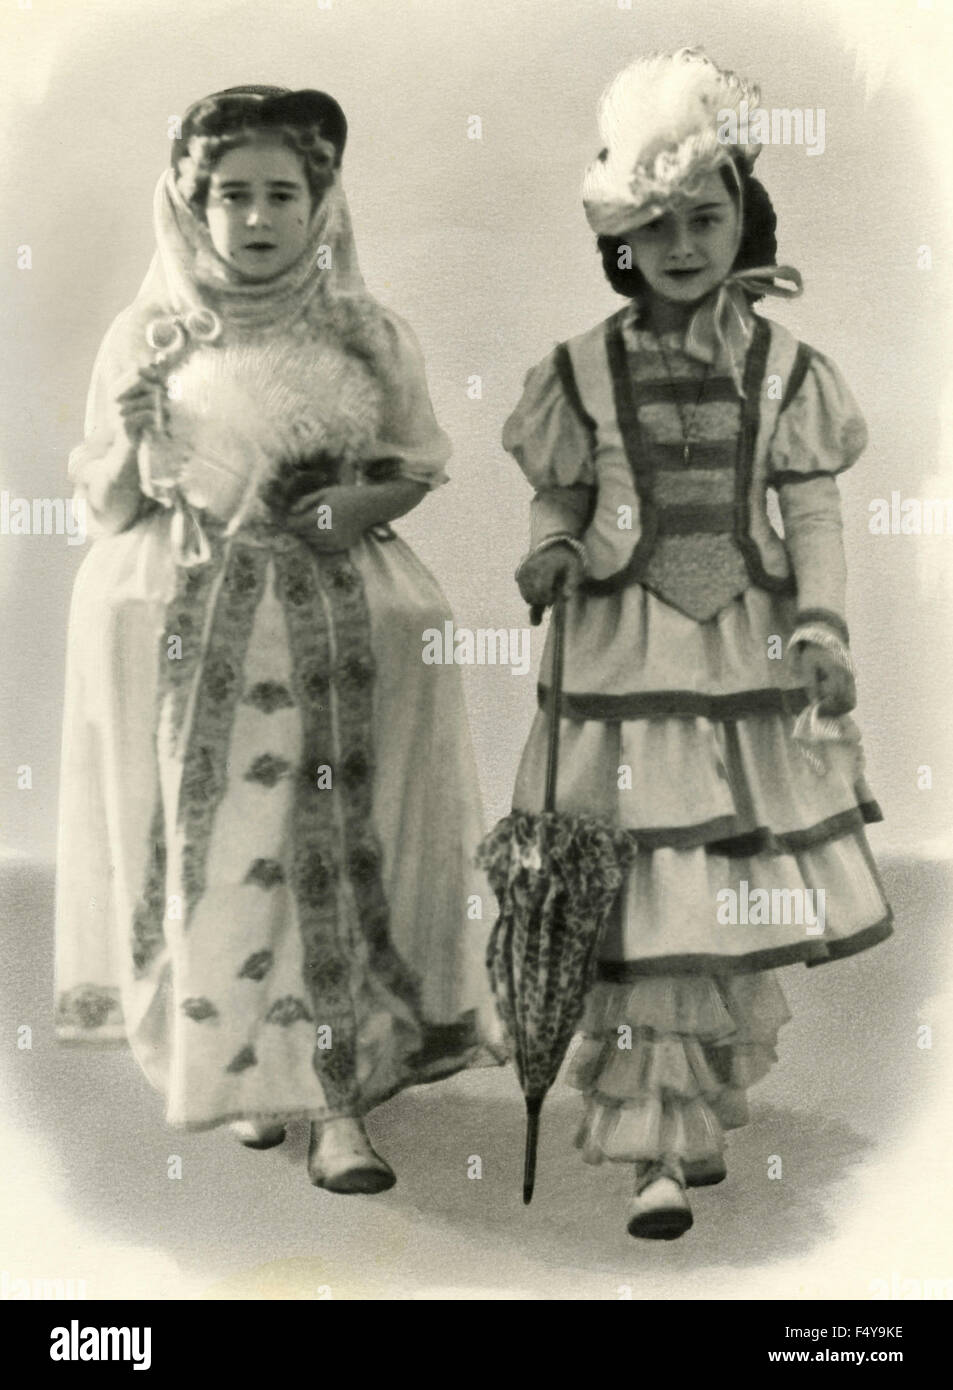 Two girls with clothes nineteenth century Stock Photo